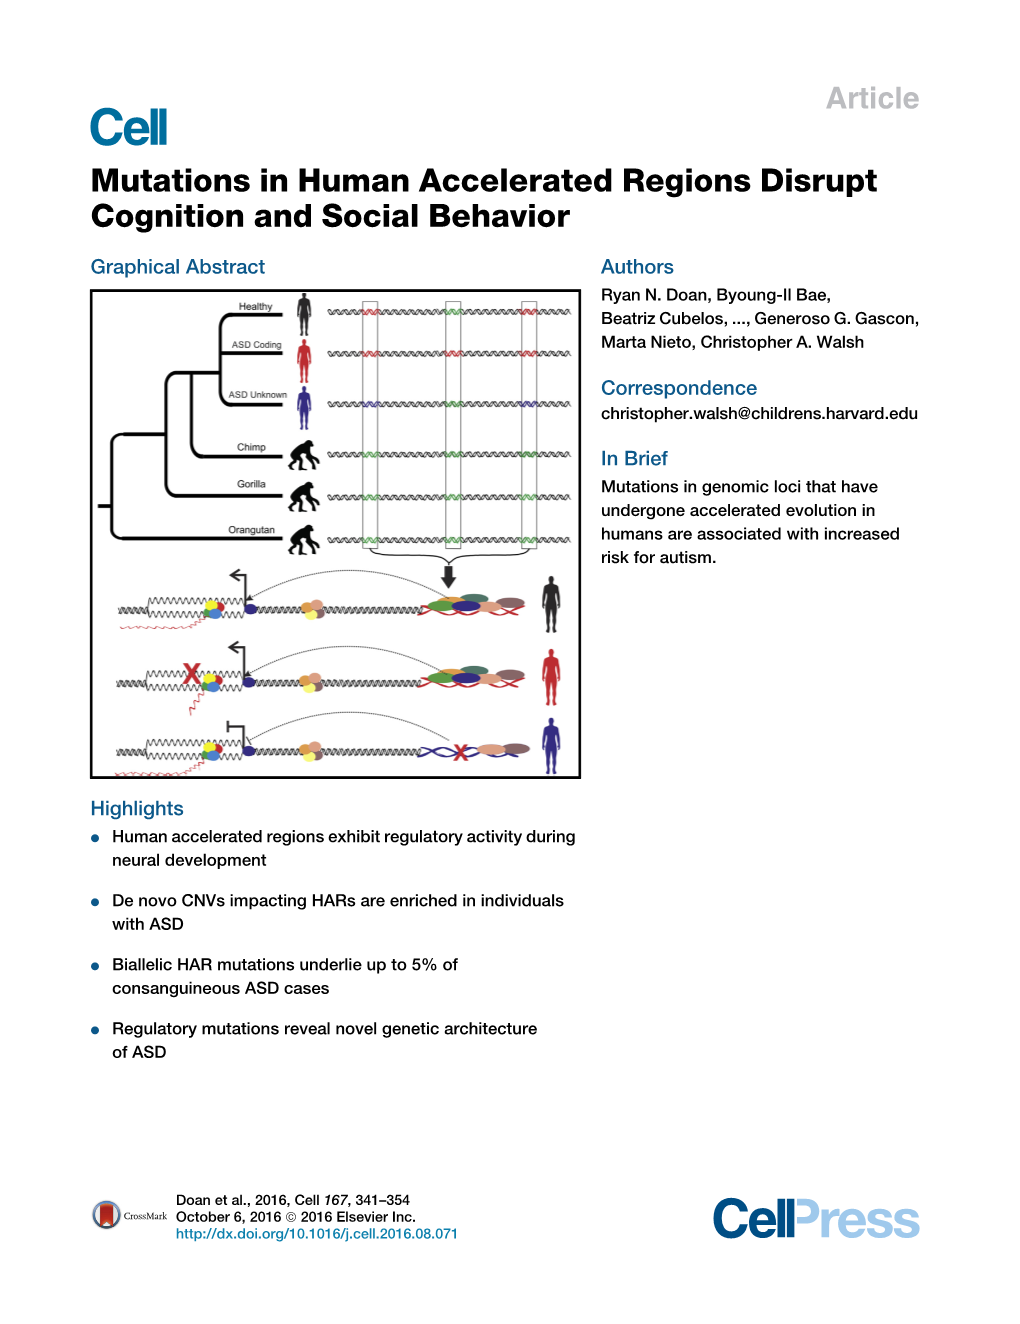 Mutations in Human Accelerated Regions Disrupt Cognition and Social Behavior